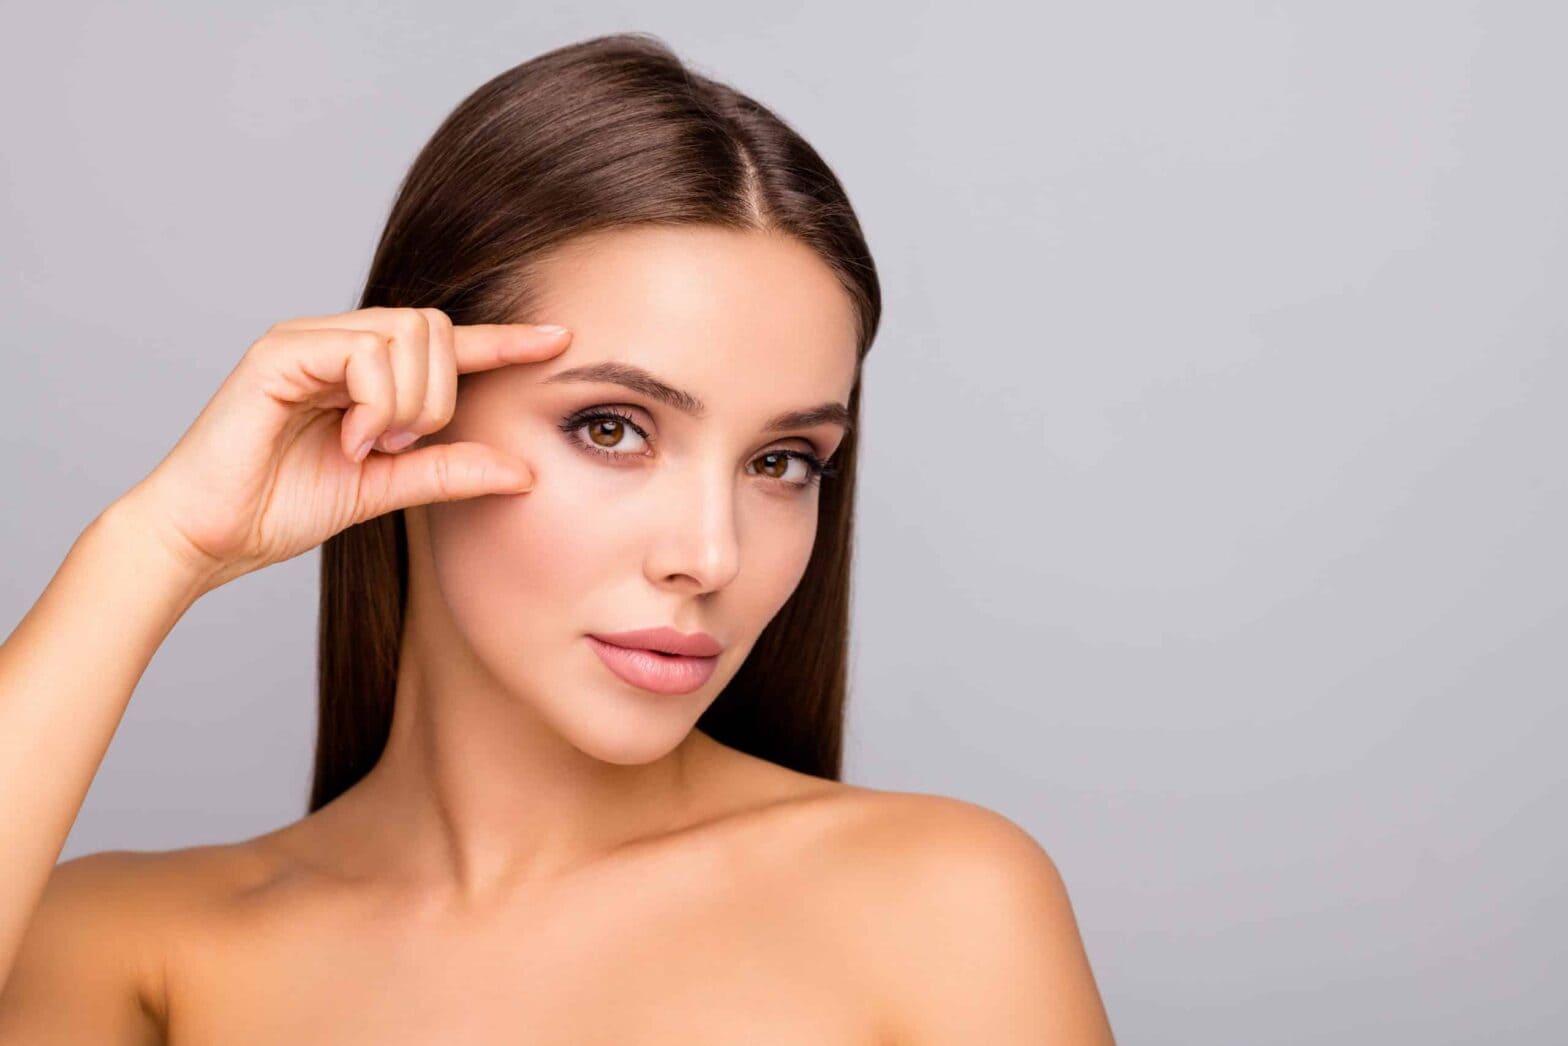 A Brow Lift or Eyelid Surgery: Which One is Right for You?